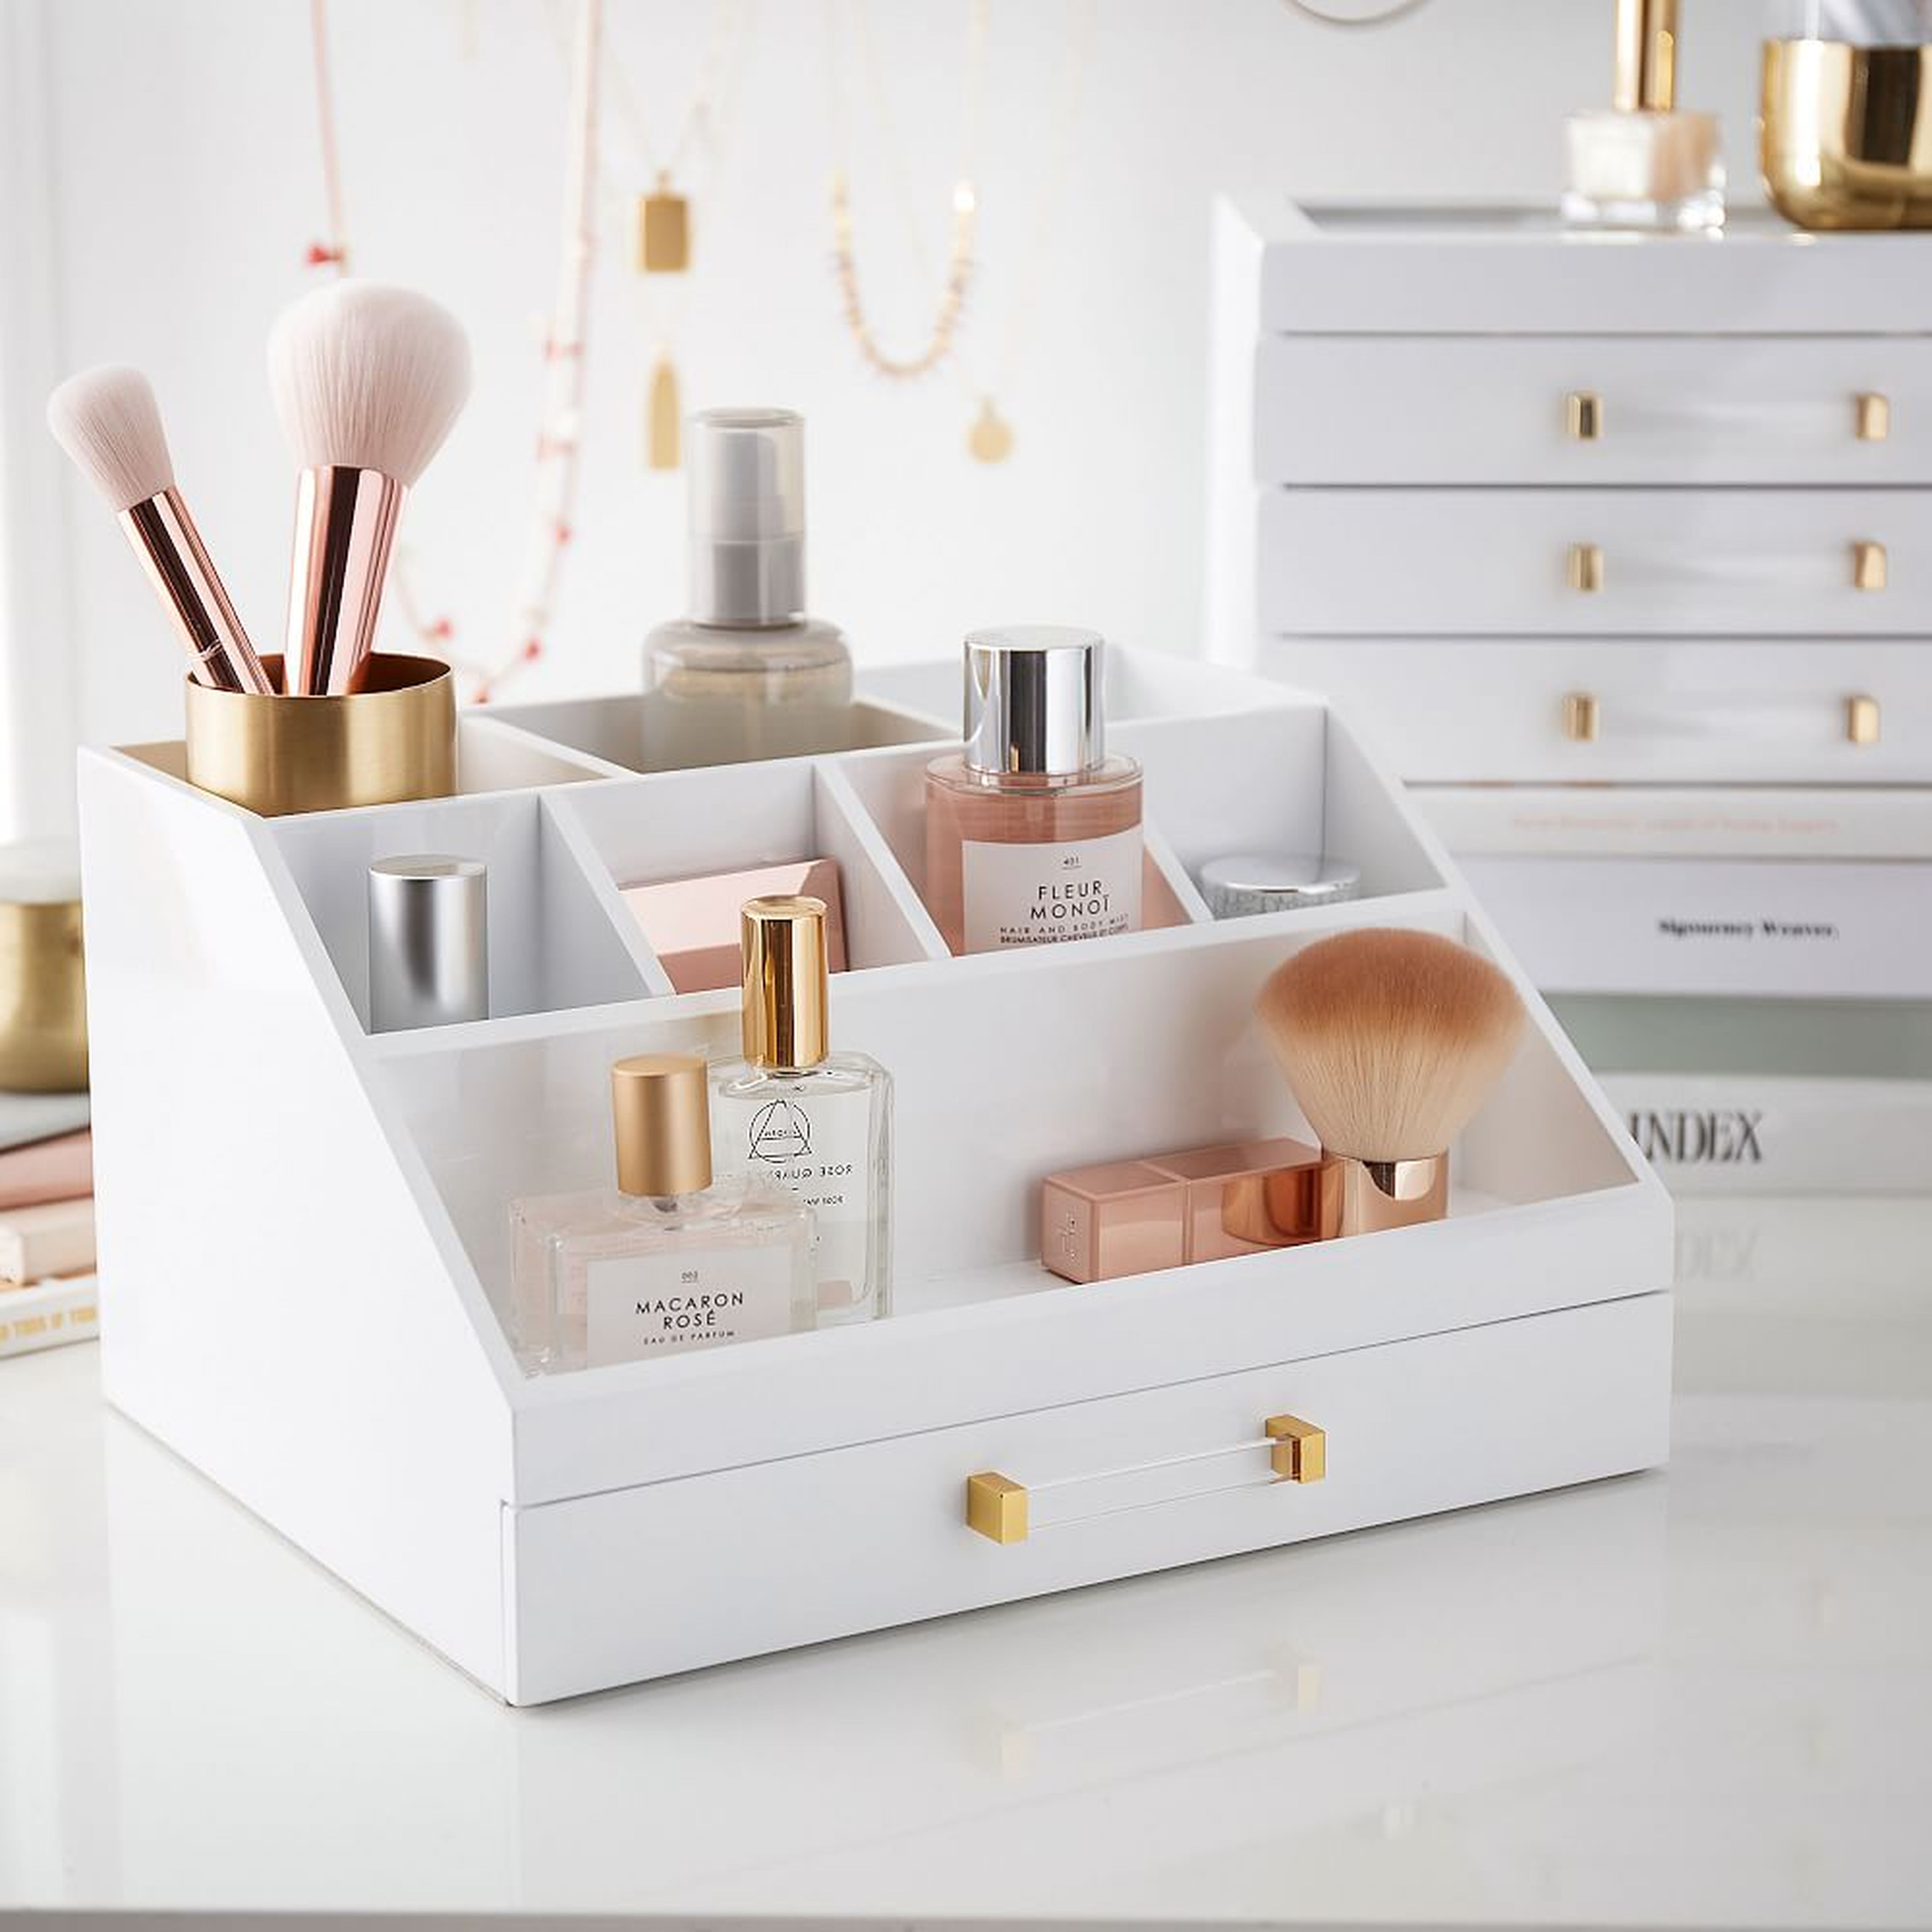 Elle Lacquer Makeup Organizer, White/Gold - Pottery Barn Teen